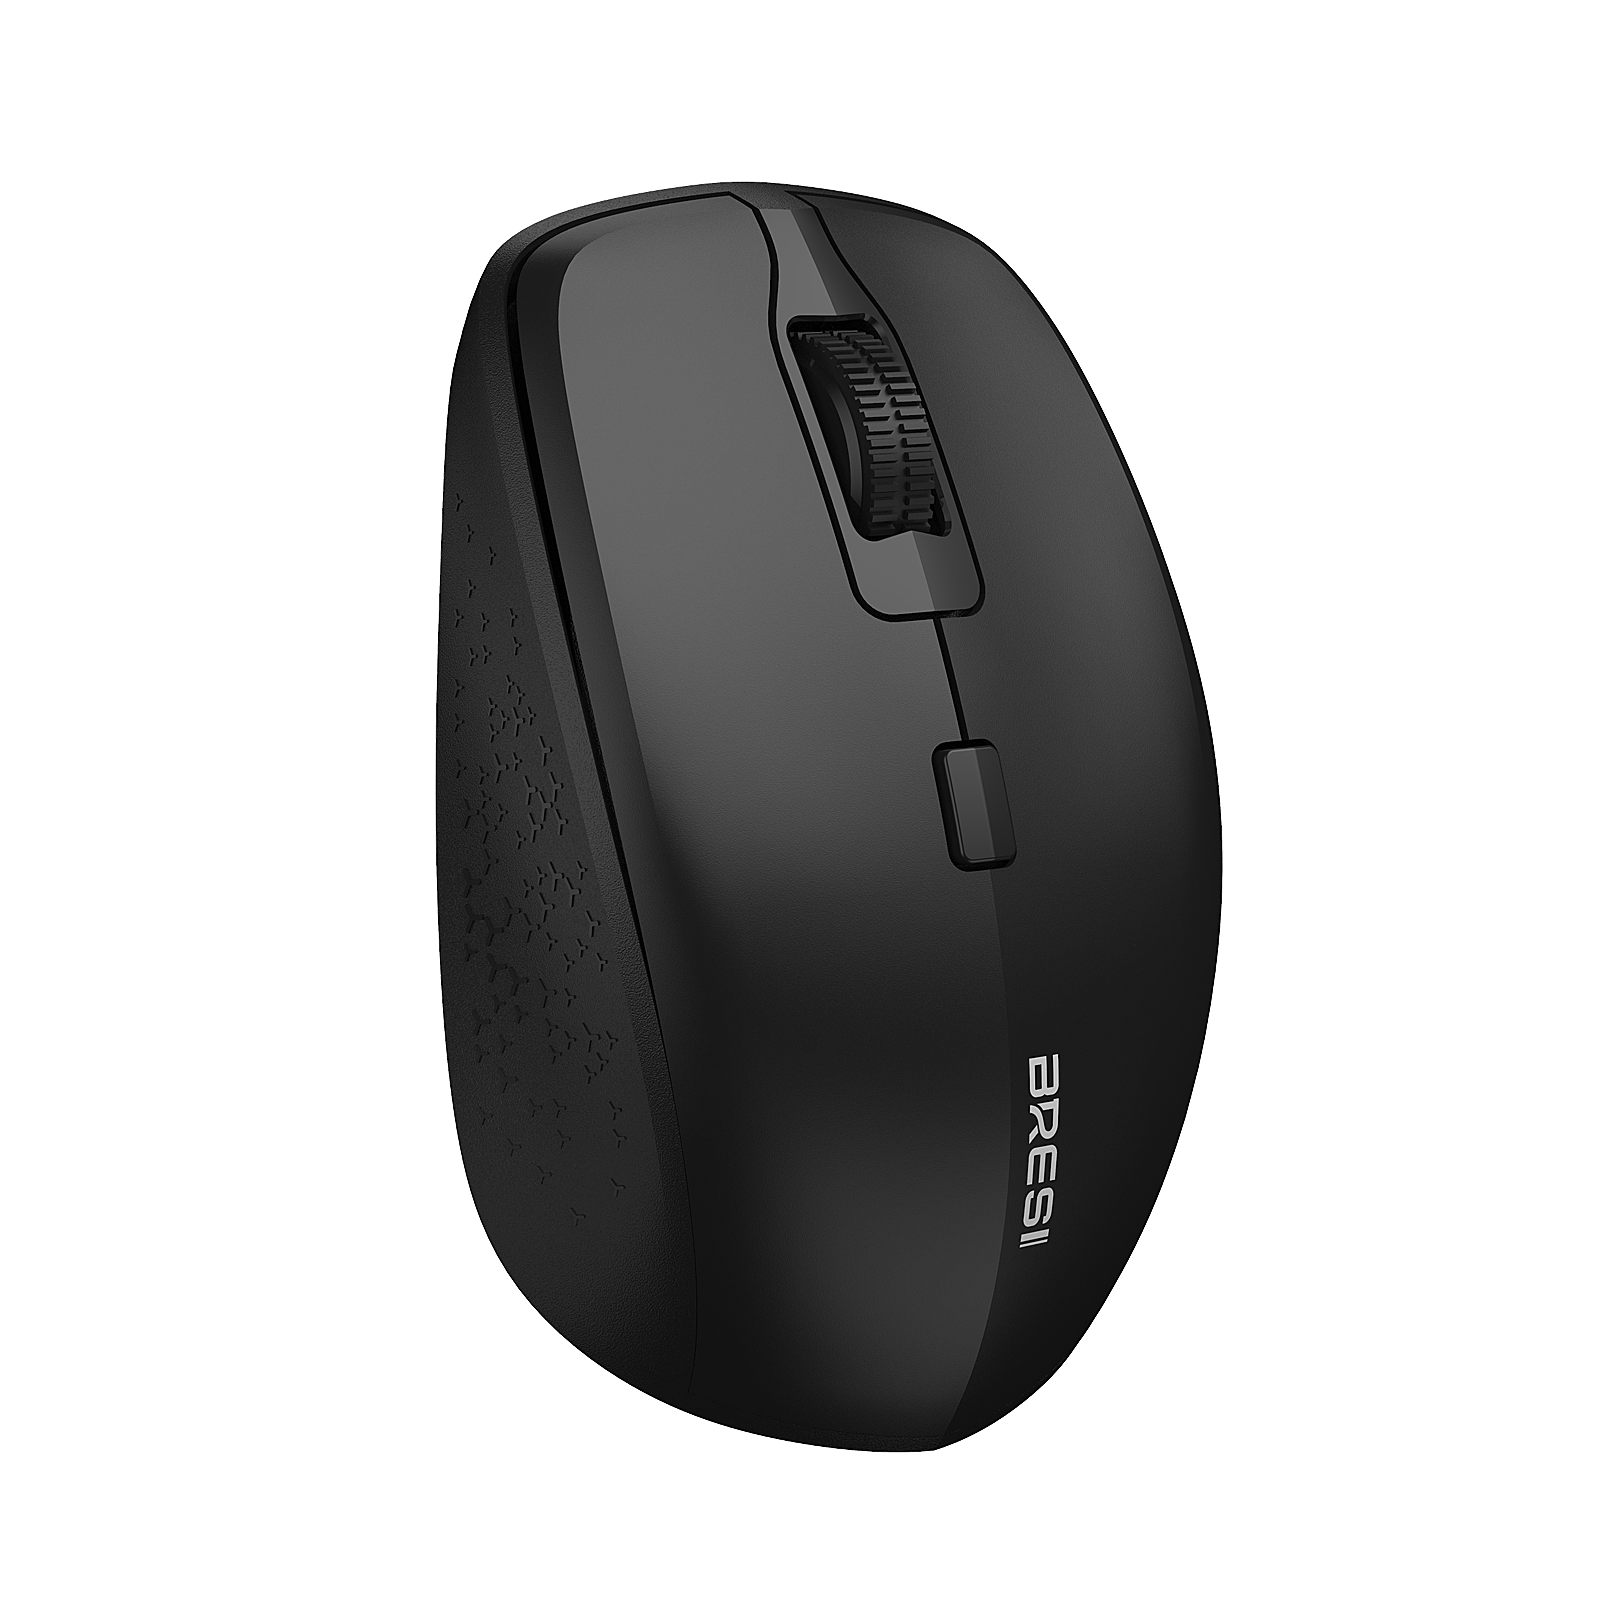  BreSii Bluetooth Wireless Mouse: Bluetooth Mouse for